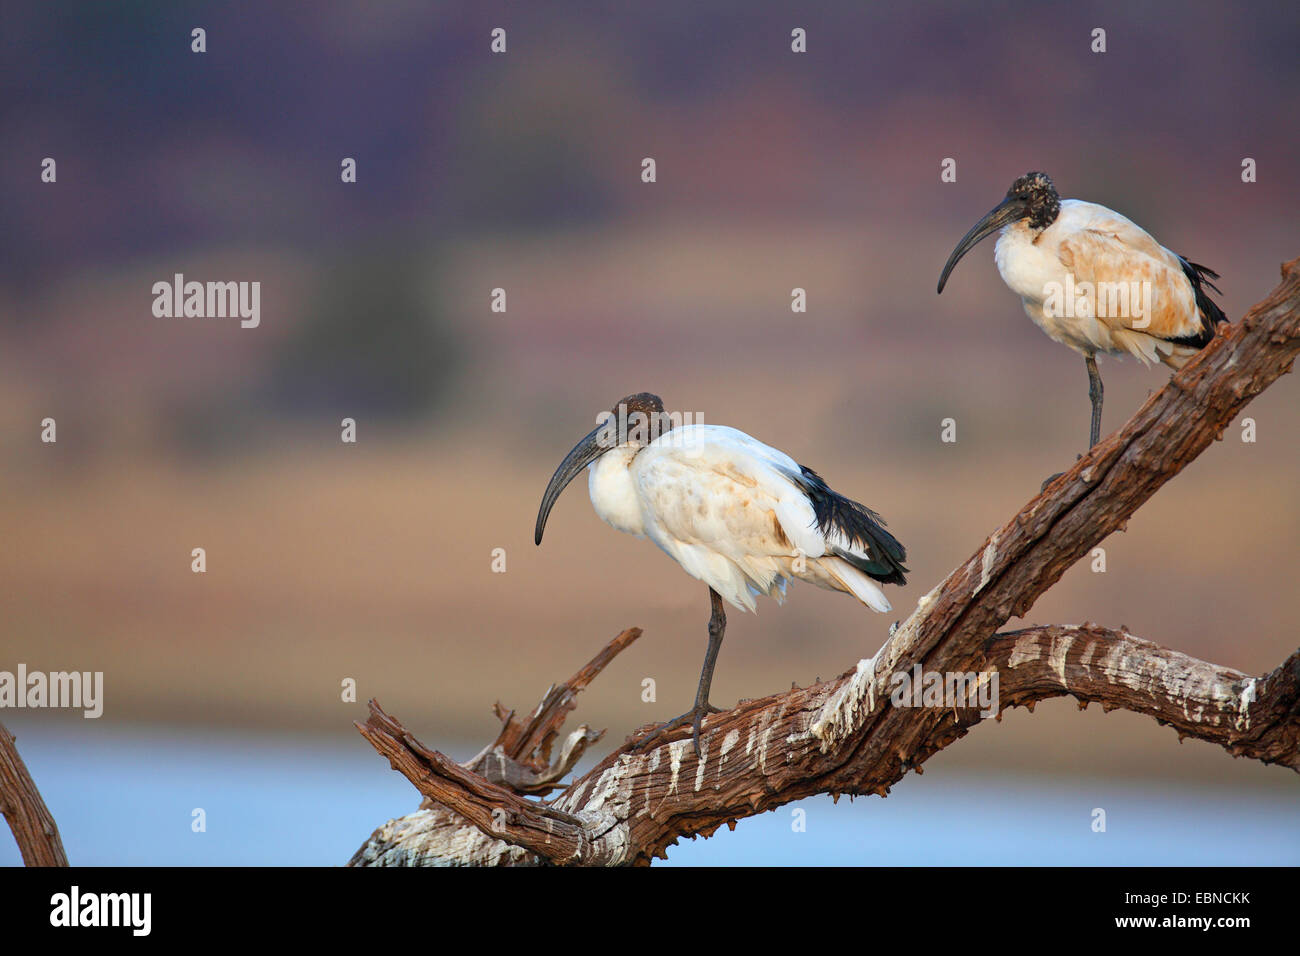 sacred ibis (Threskiornis aethiopicus), two ibises standing on a dead tree, South Africa, Pilanesberg National Park Stock Photo